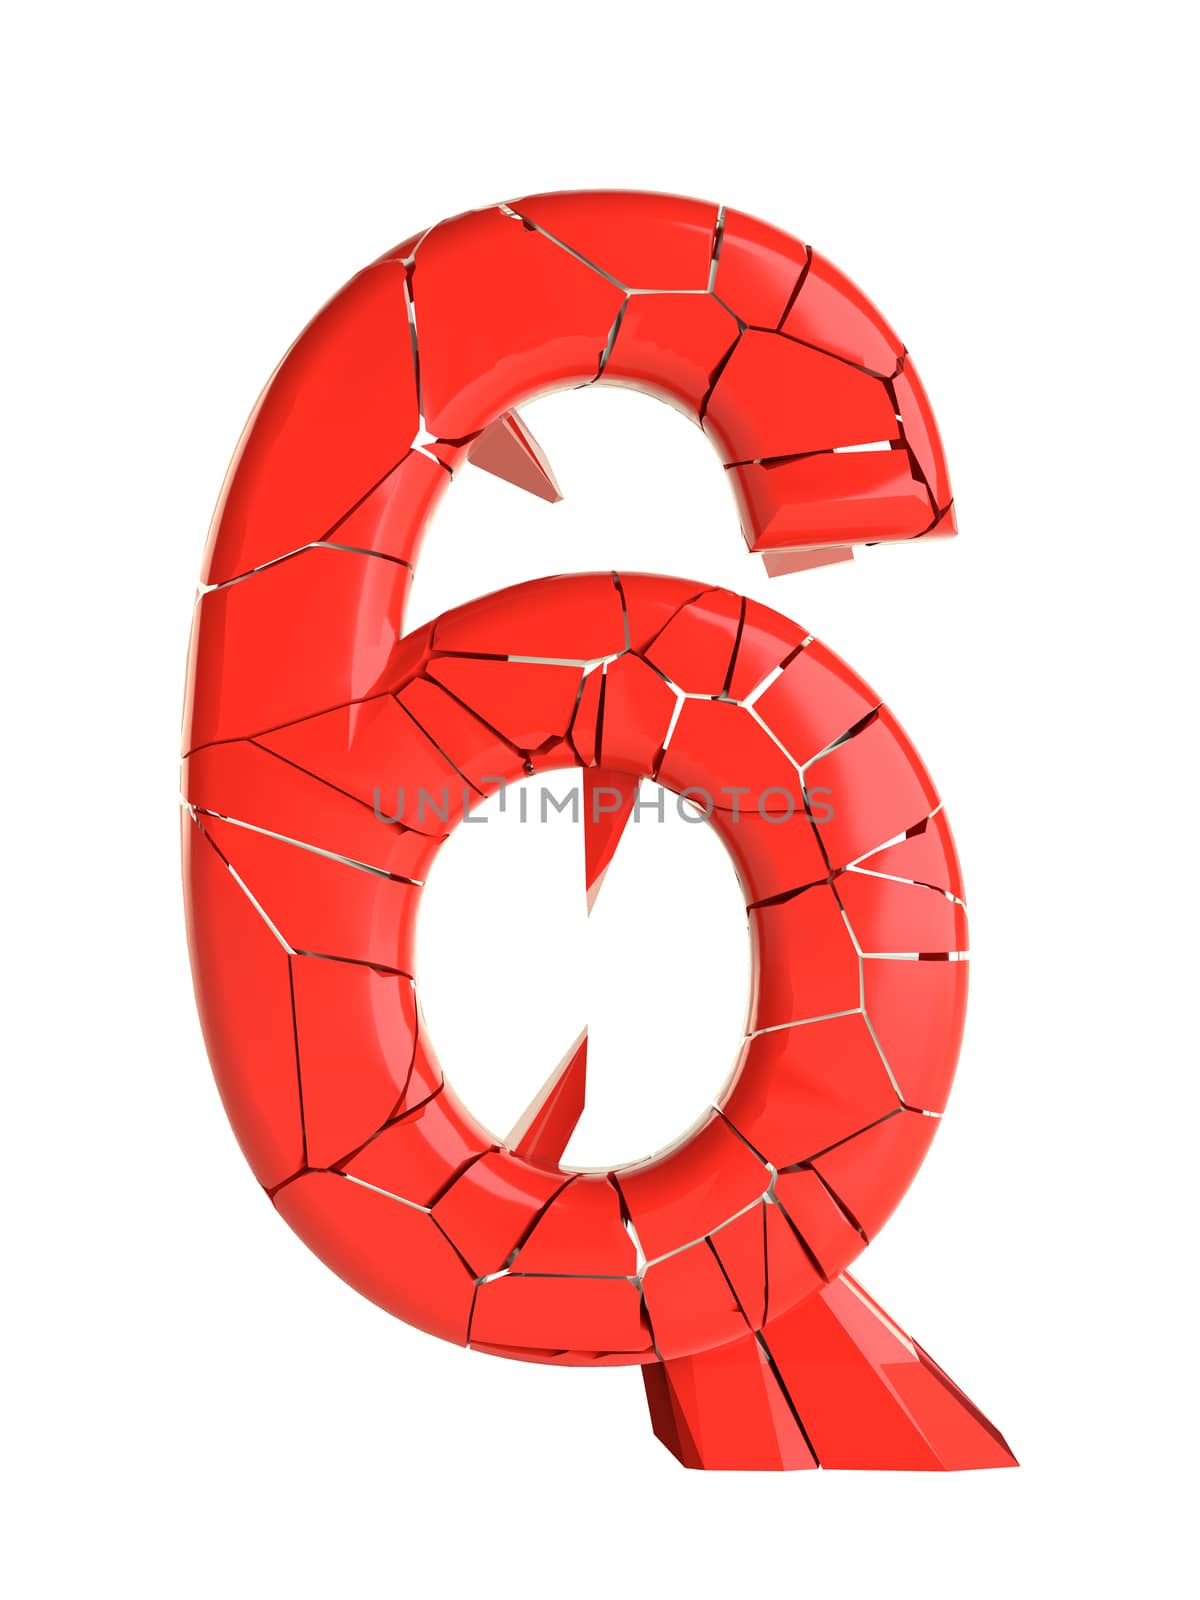 Futuristic red cracked number. Abstract font for your design. Isolated on white background. 3D illustration